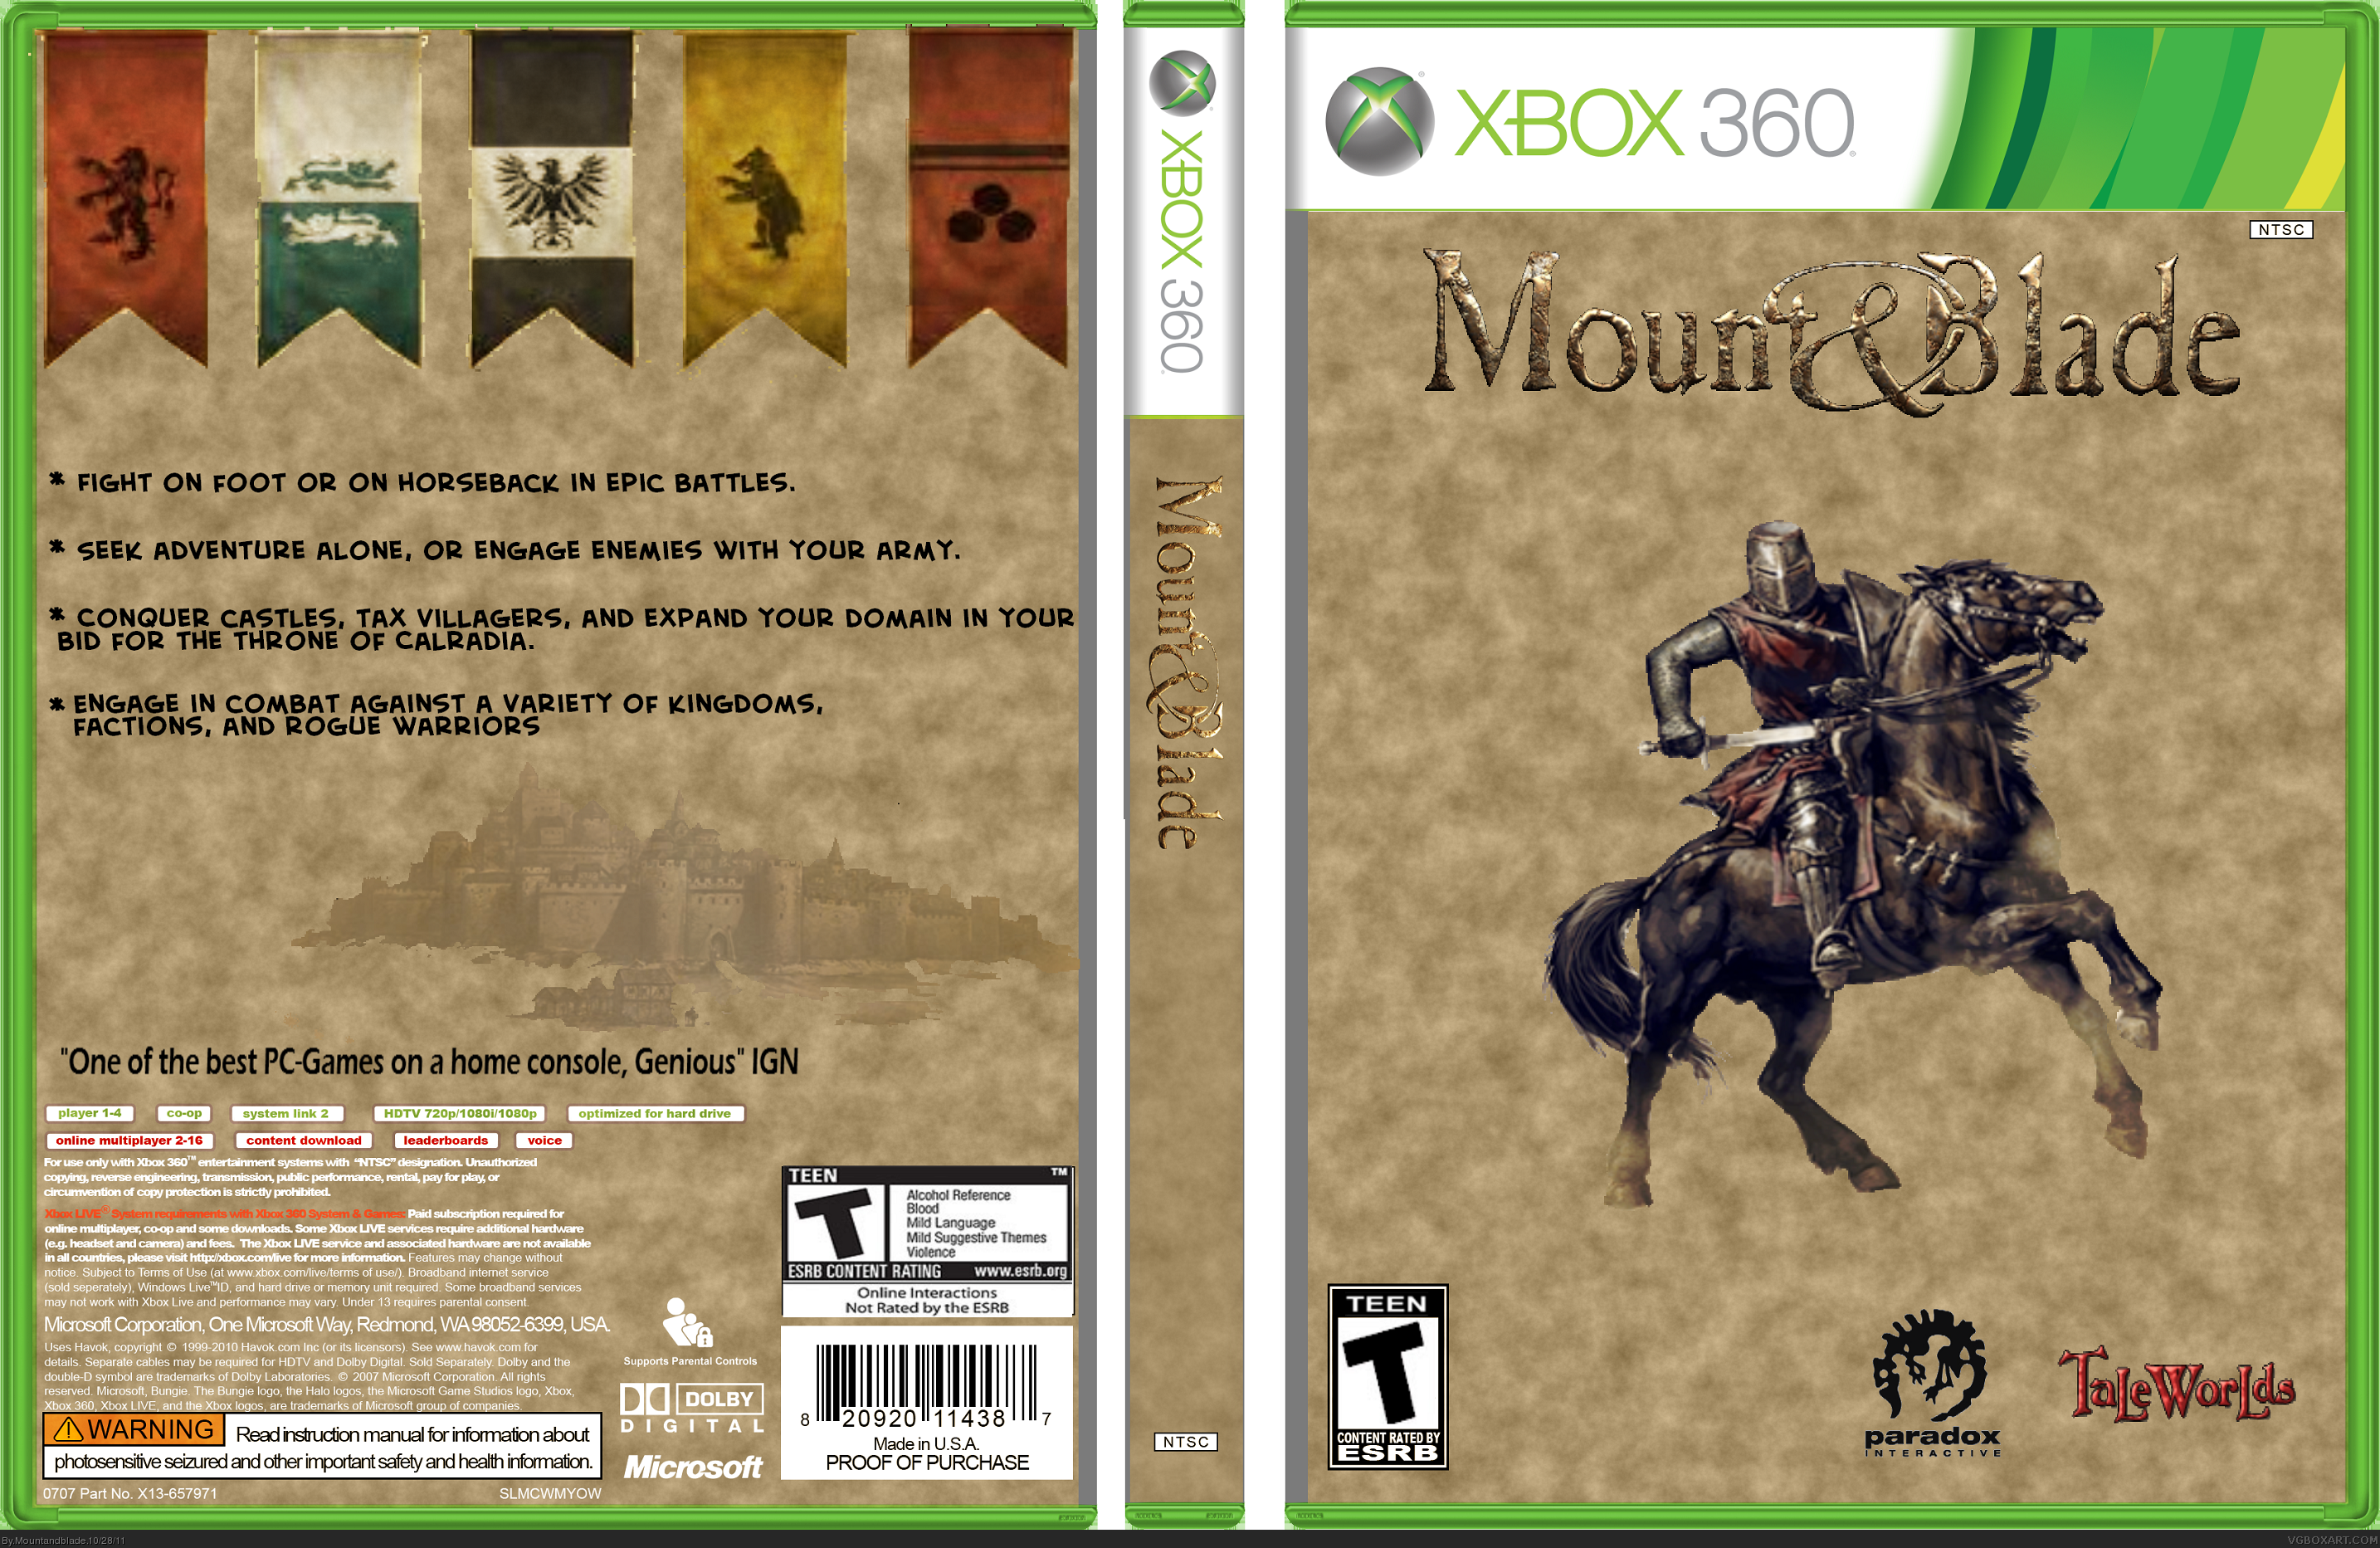 Mount & Blade box cover